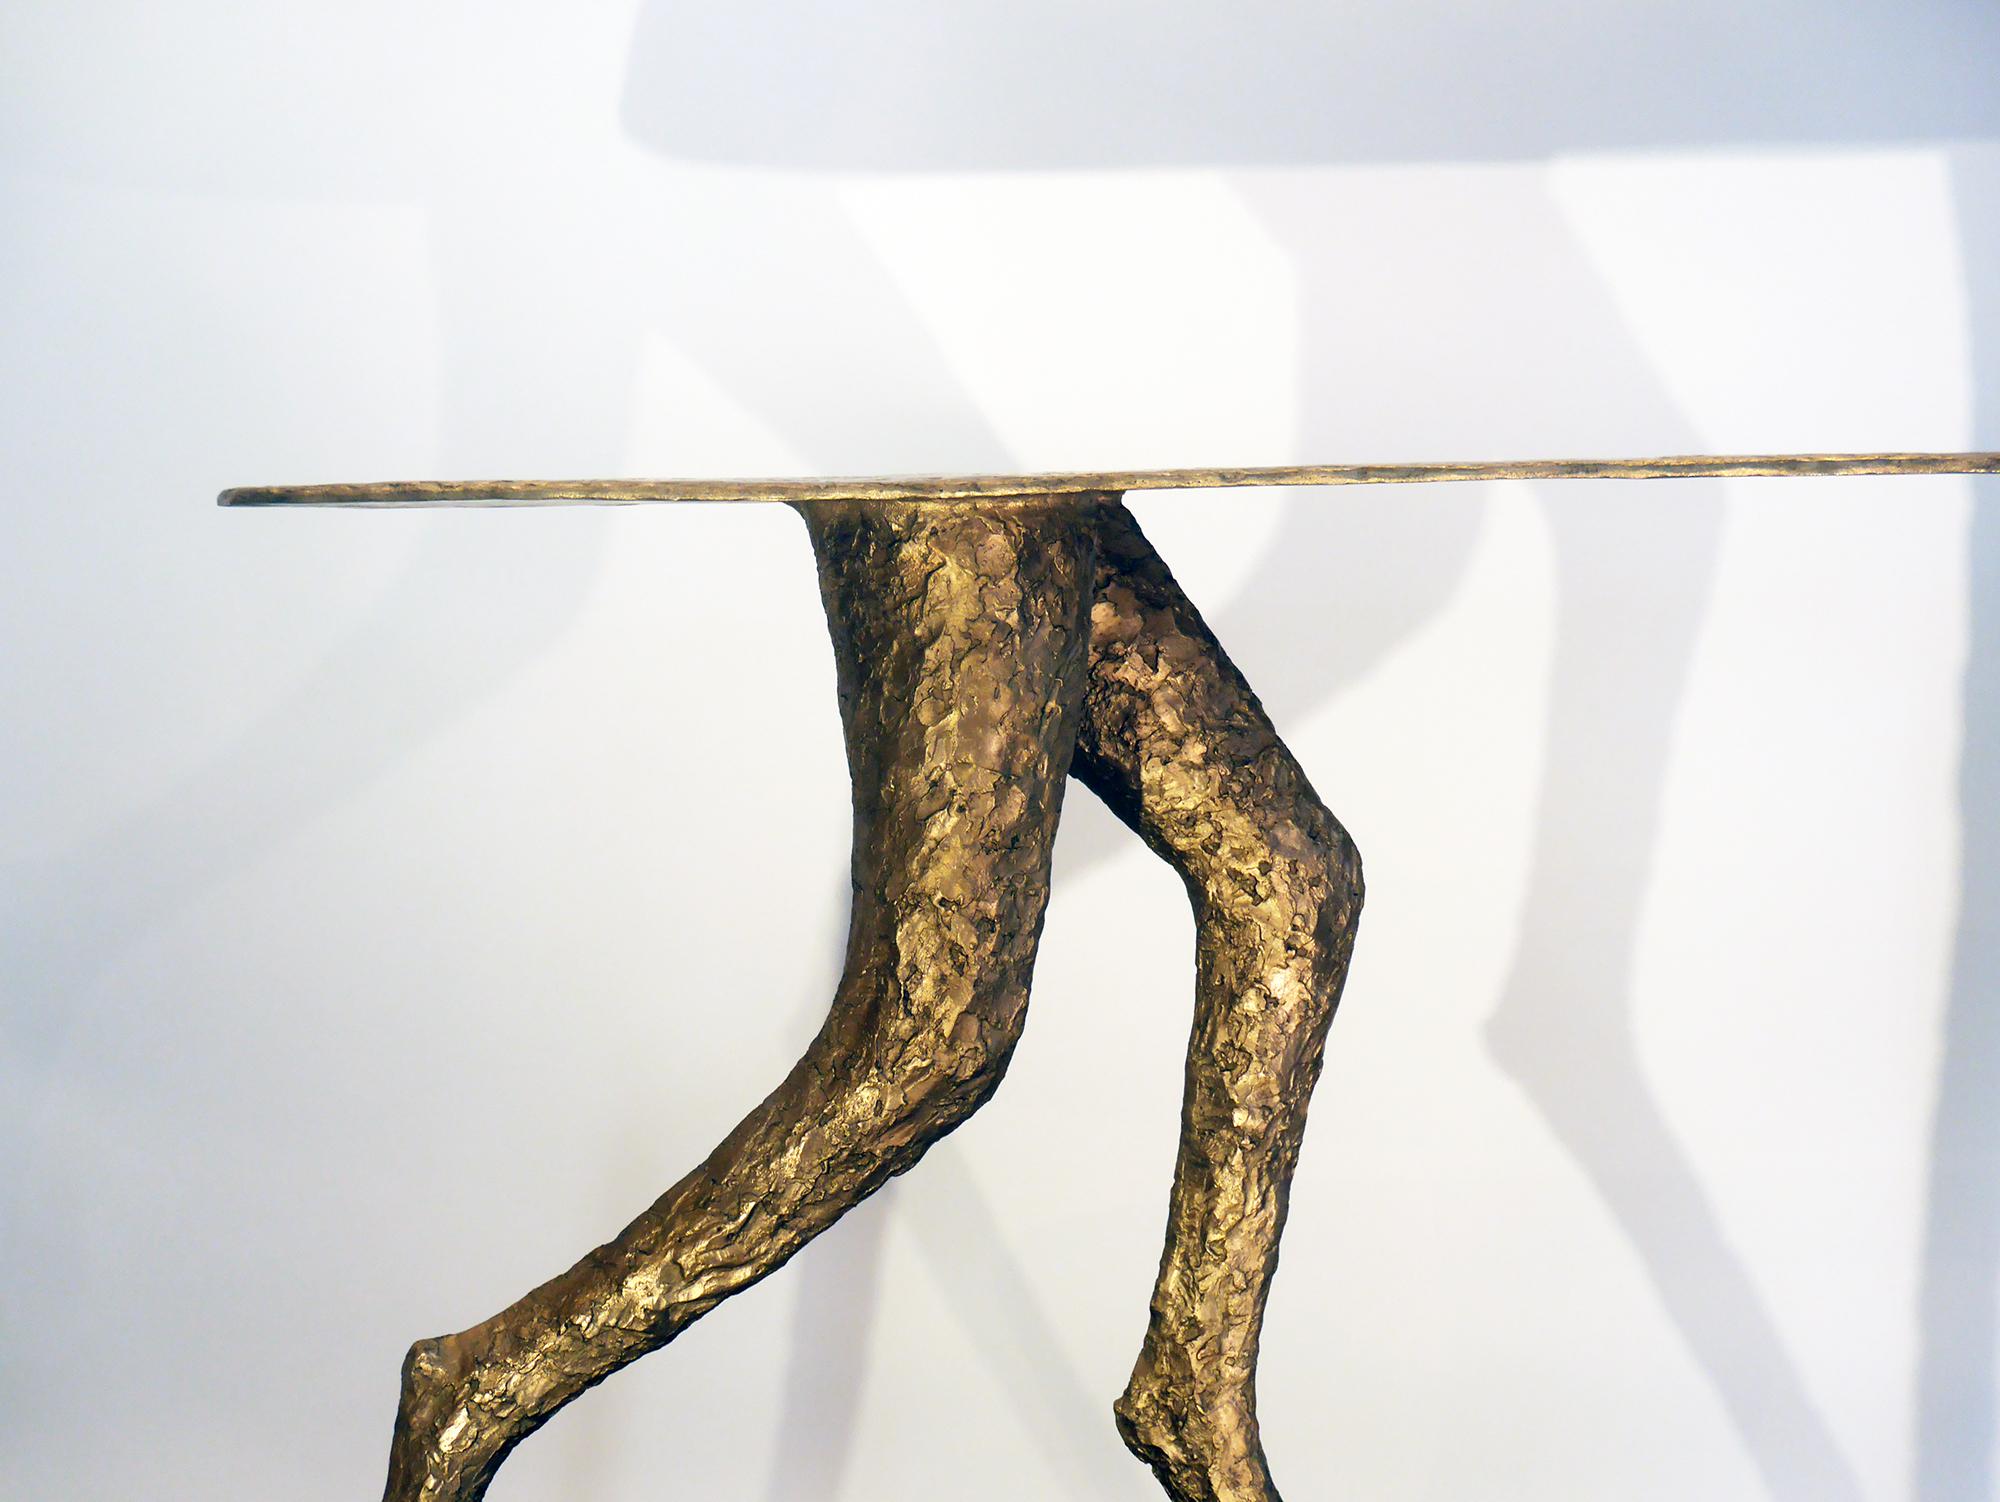 Cadence is a bronze console by the French contemporary artist, Sylvie Mangaud. 
It's an edition of 8, plus 4 artist proofs. One of it is kept by this artist. The edition here is 2/8.

Known for her elongated women or animals in motion, Sylvie has